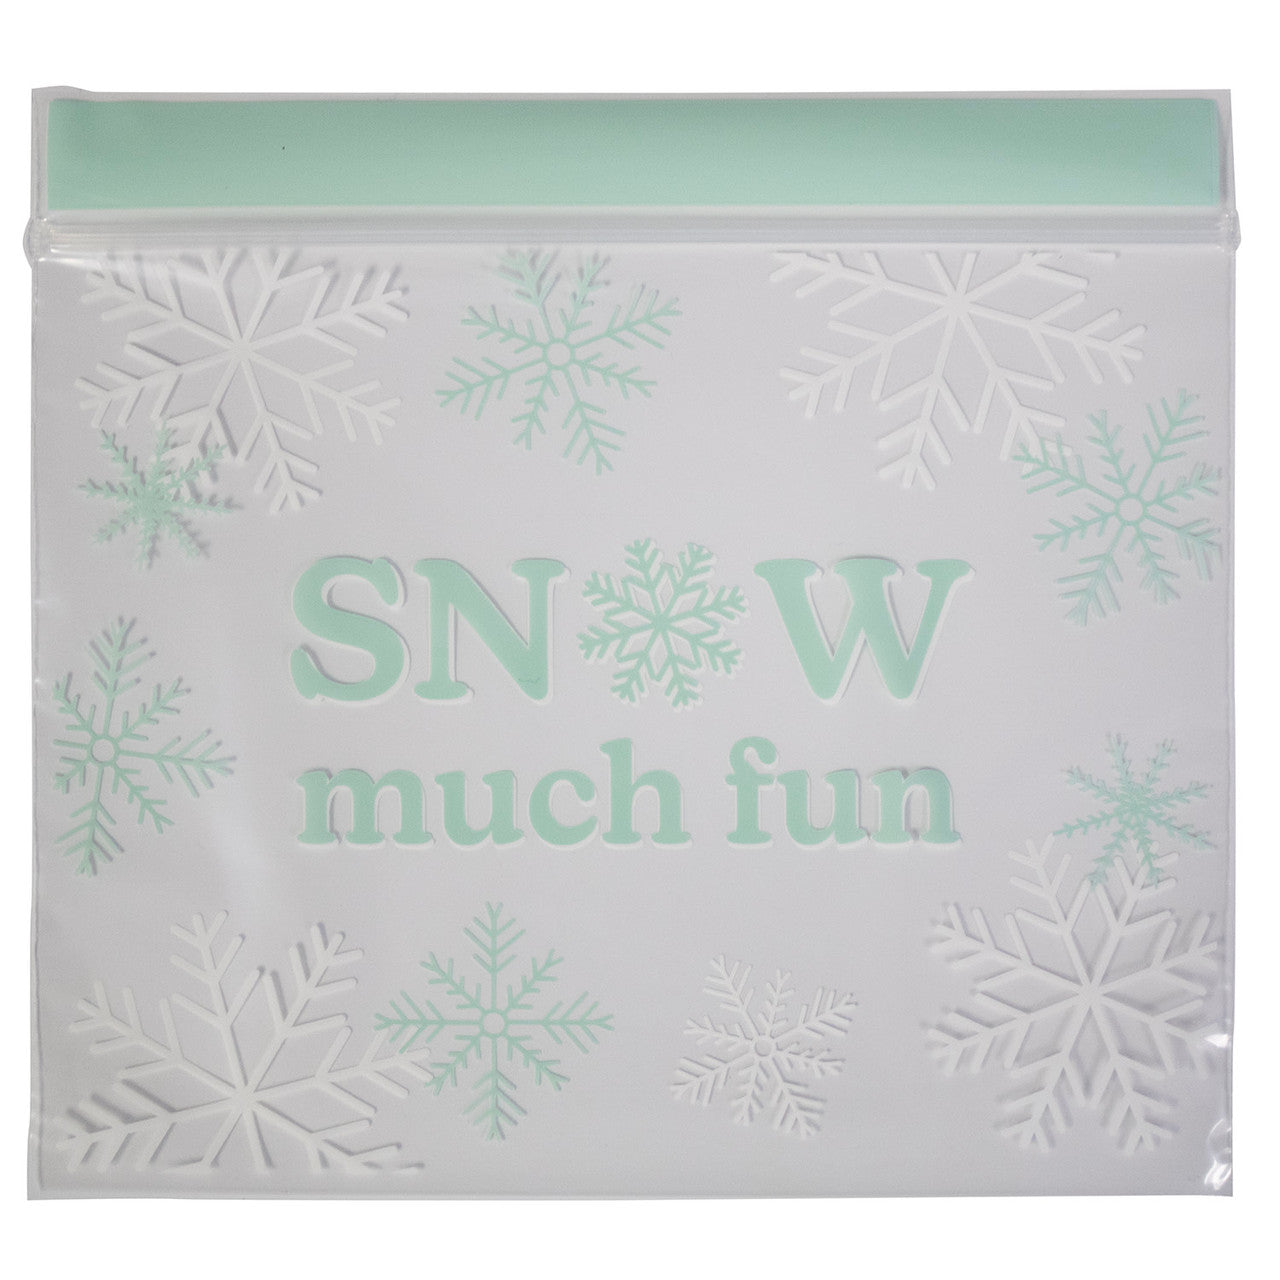 Snow Much Fun Reseal Bags, 20 Pack